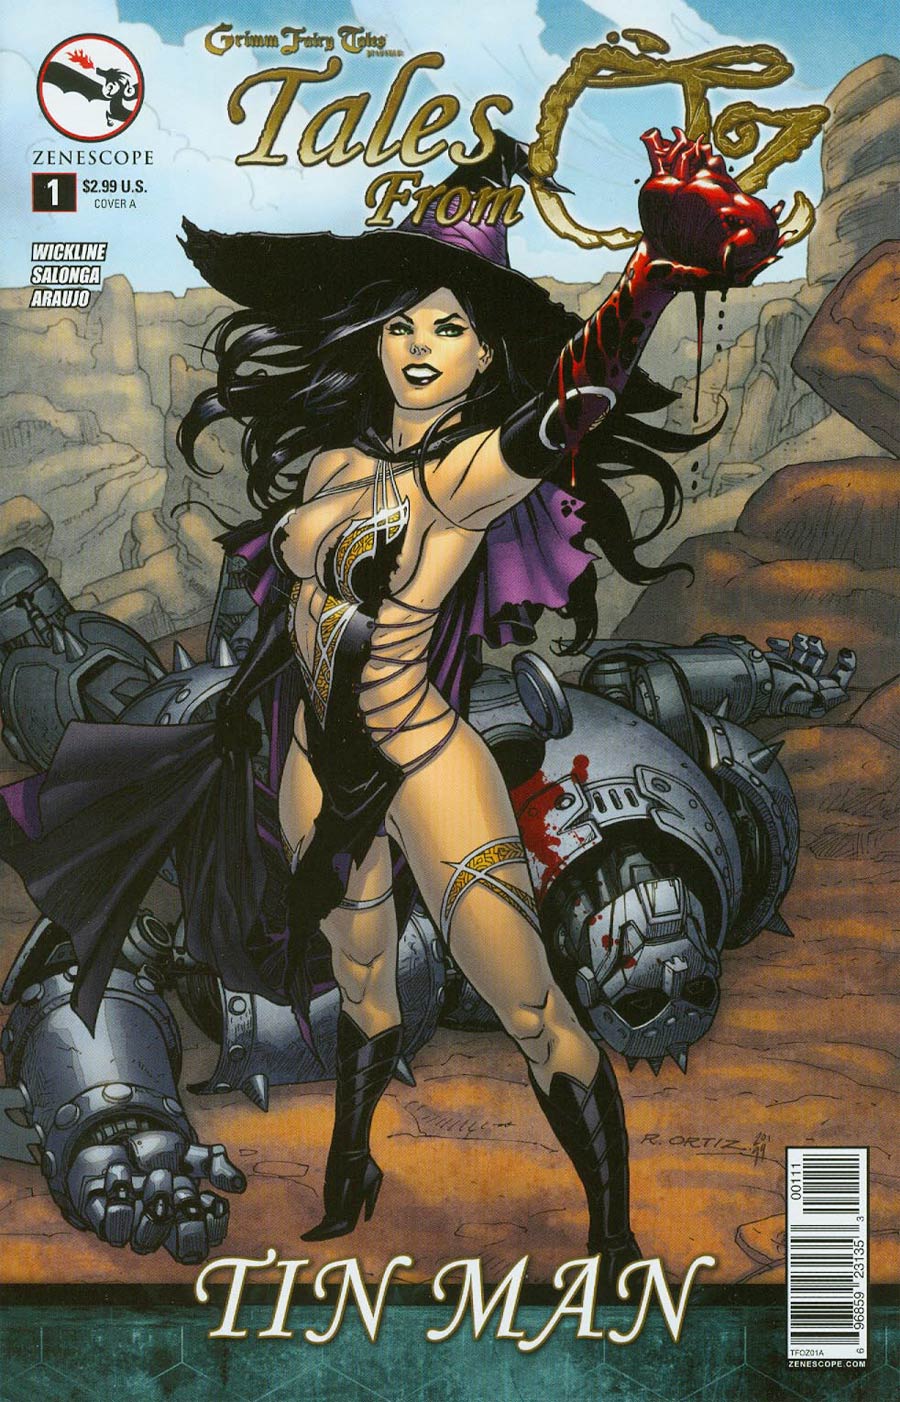 Grimm Fairy Tales Presents Tales From Oz #1 Tin Man Cover A Richard Ortiz